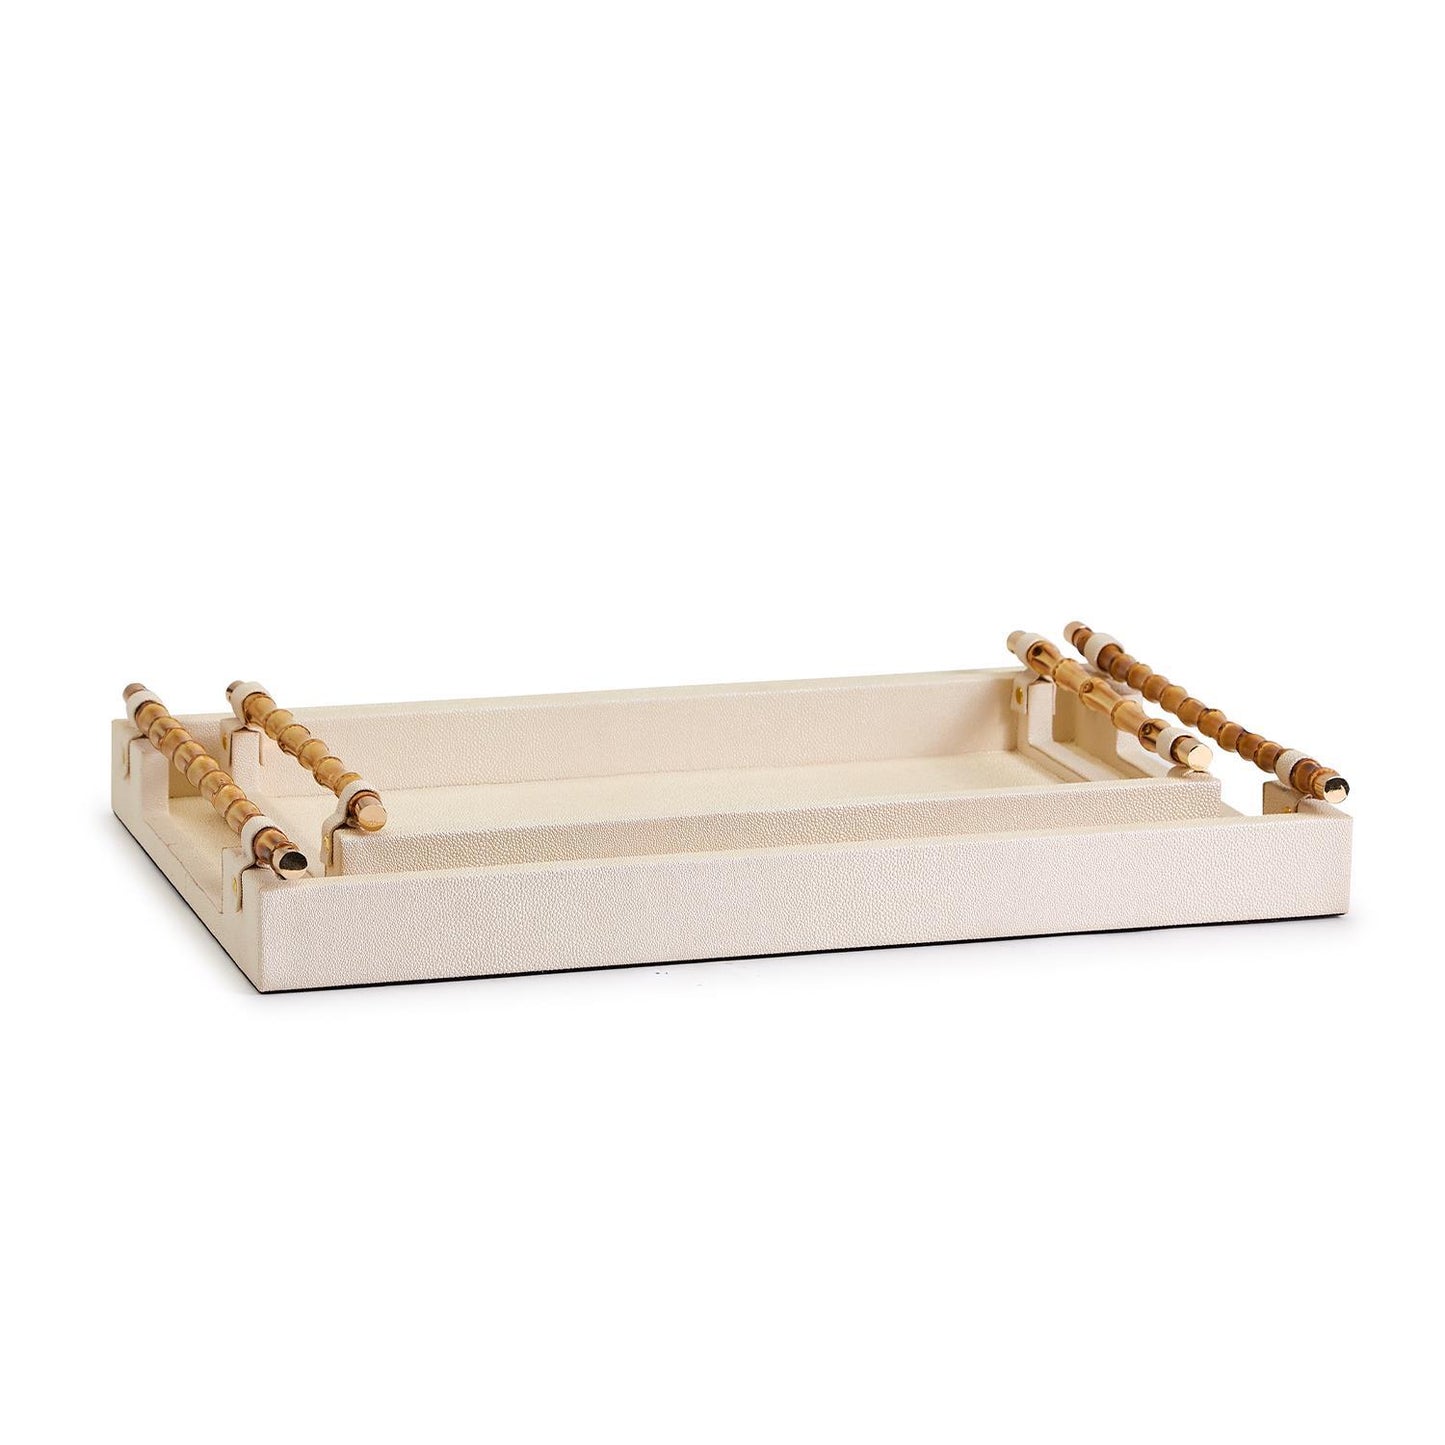 Set of 2 Antique Cream Faux Stingray Embossed Faux Leather Decorative Rectangle Tray with Genuine Bamboo Handles